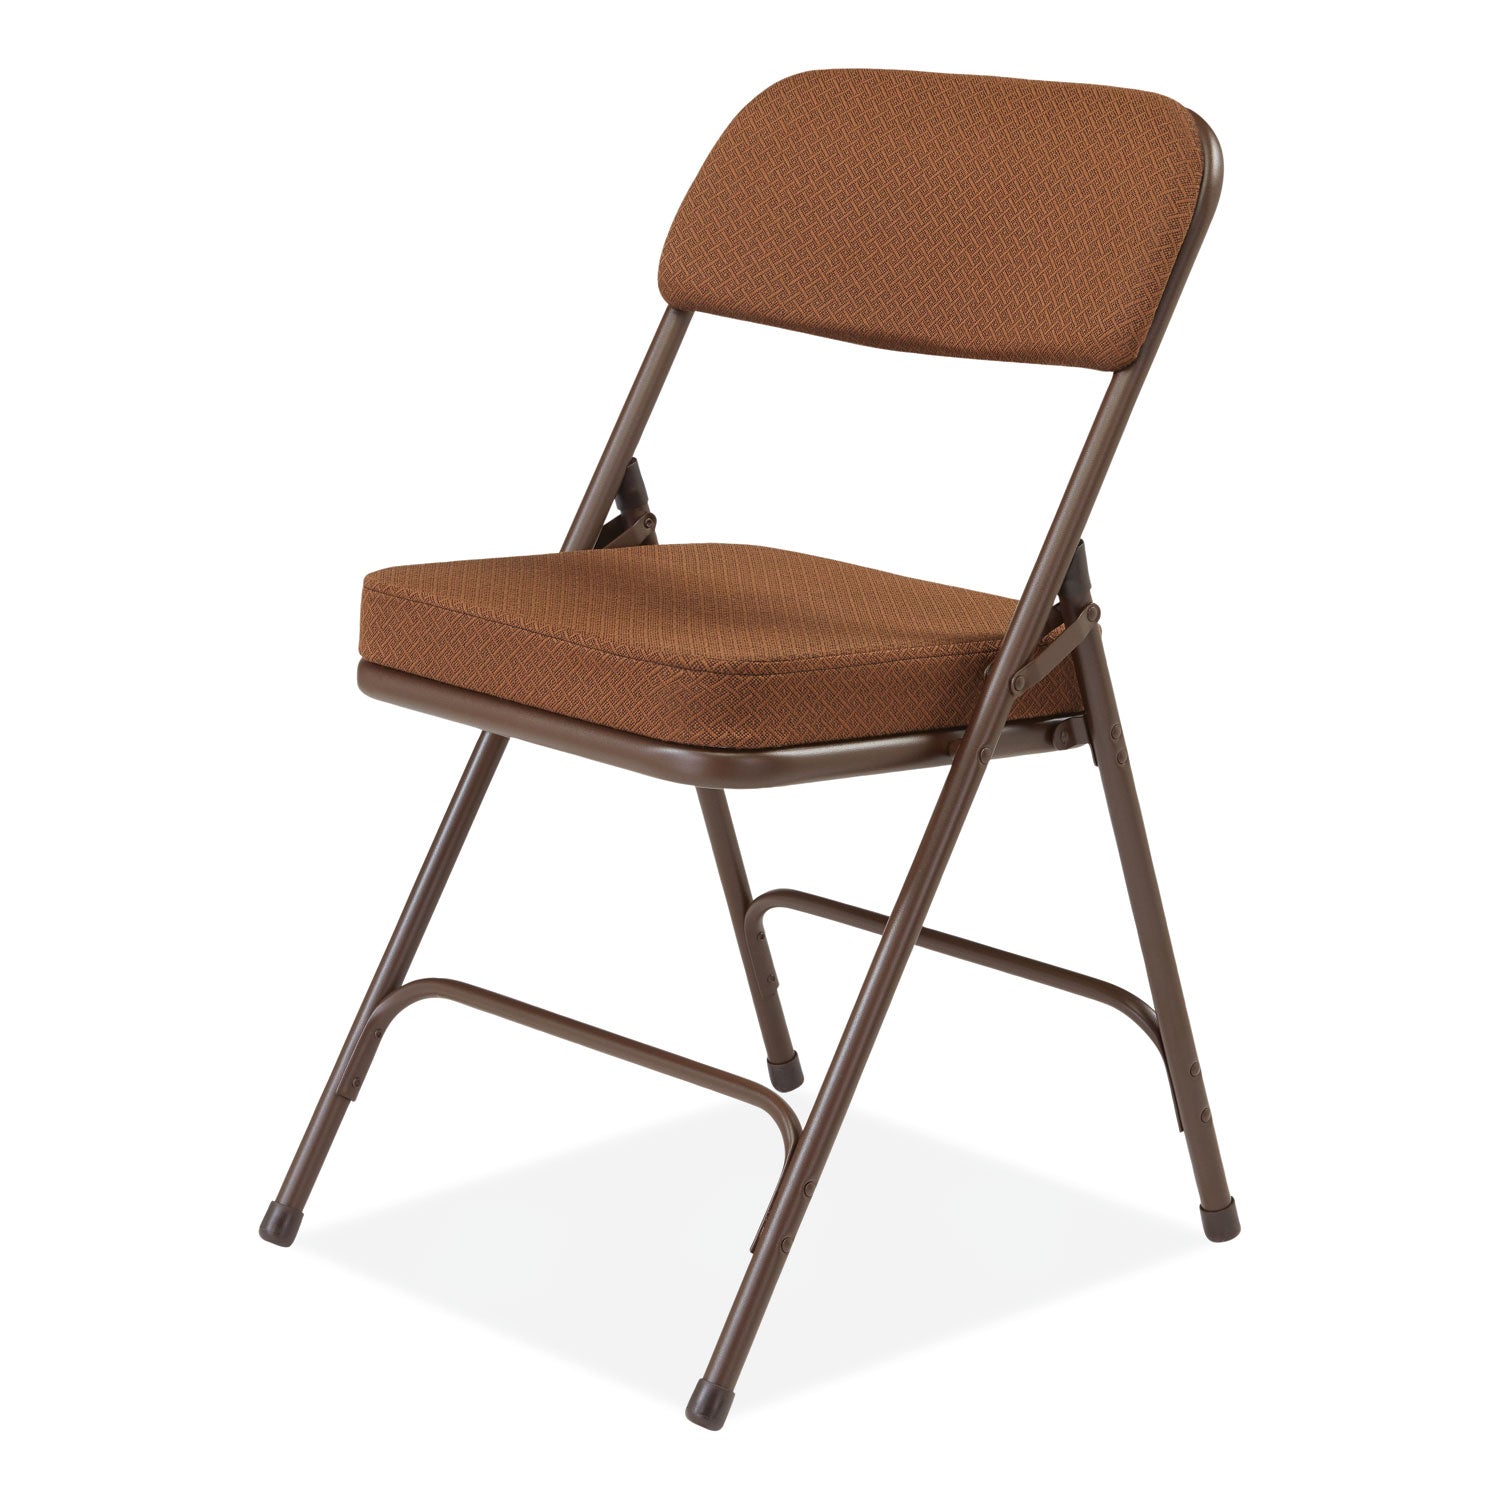 3200-series-premium-fabric-dual-hinge-folding-chair-supports-300-lb-gold-seat-back-brown-base-2-ct-ships-in-1-3-bus-days_nps3219 - 3